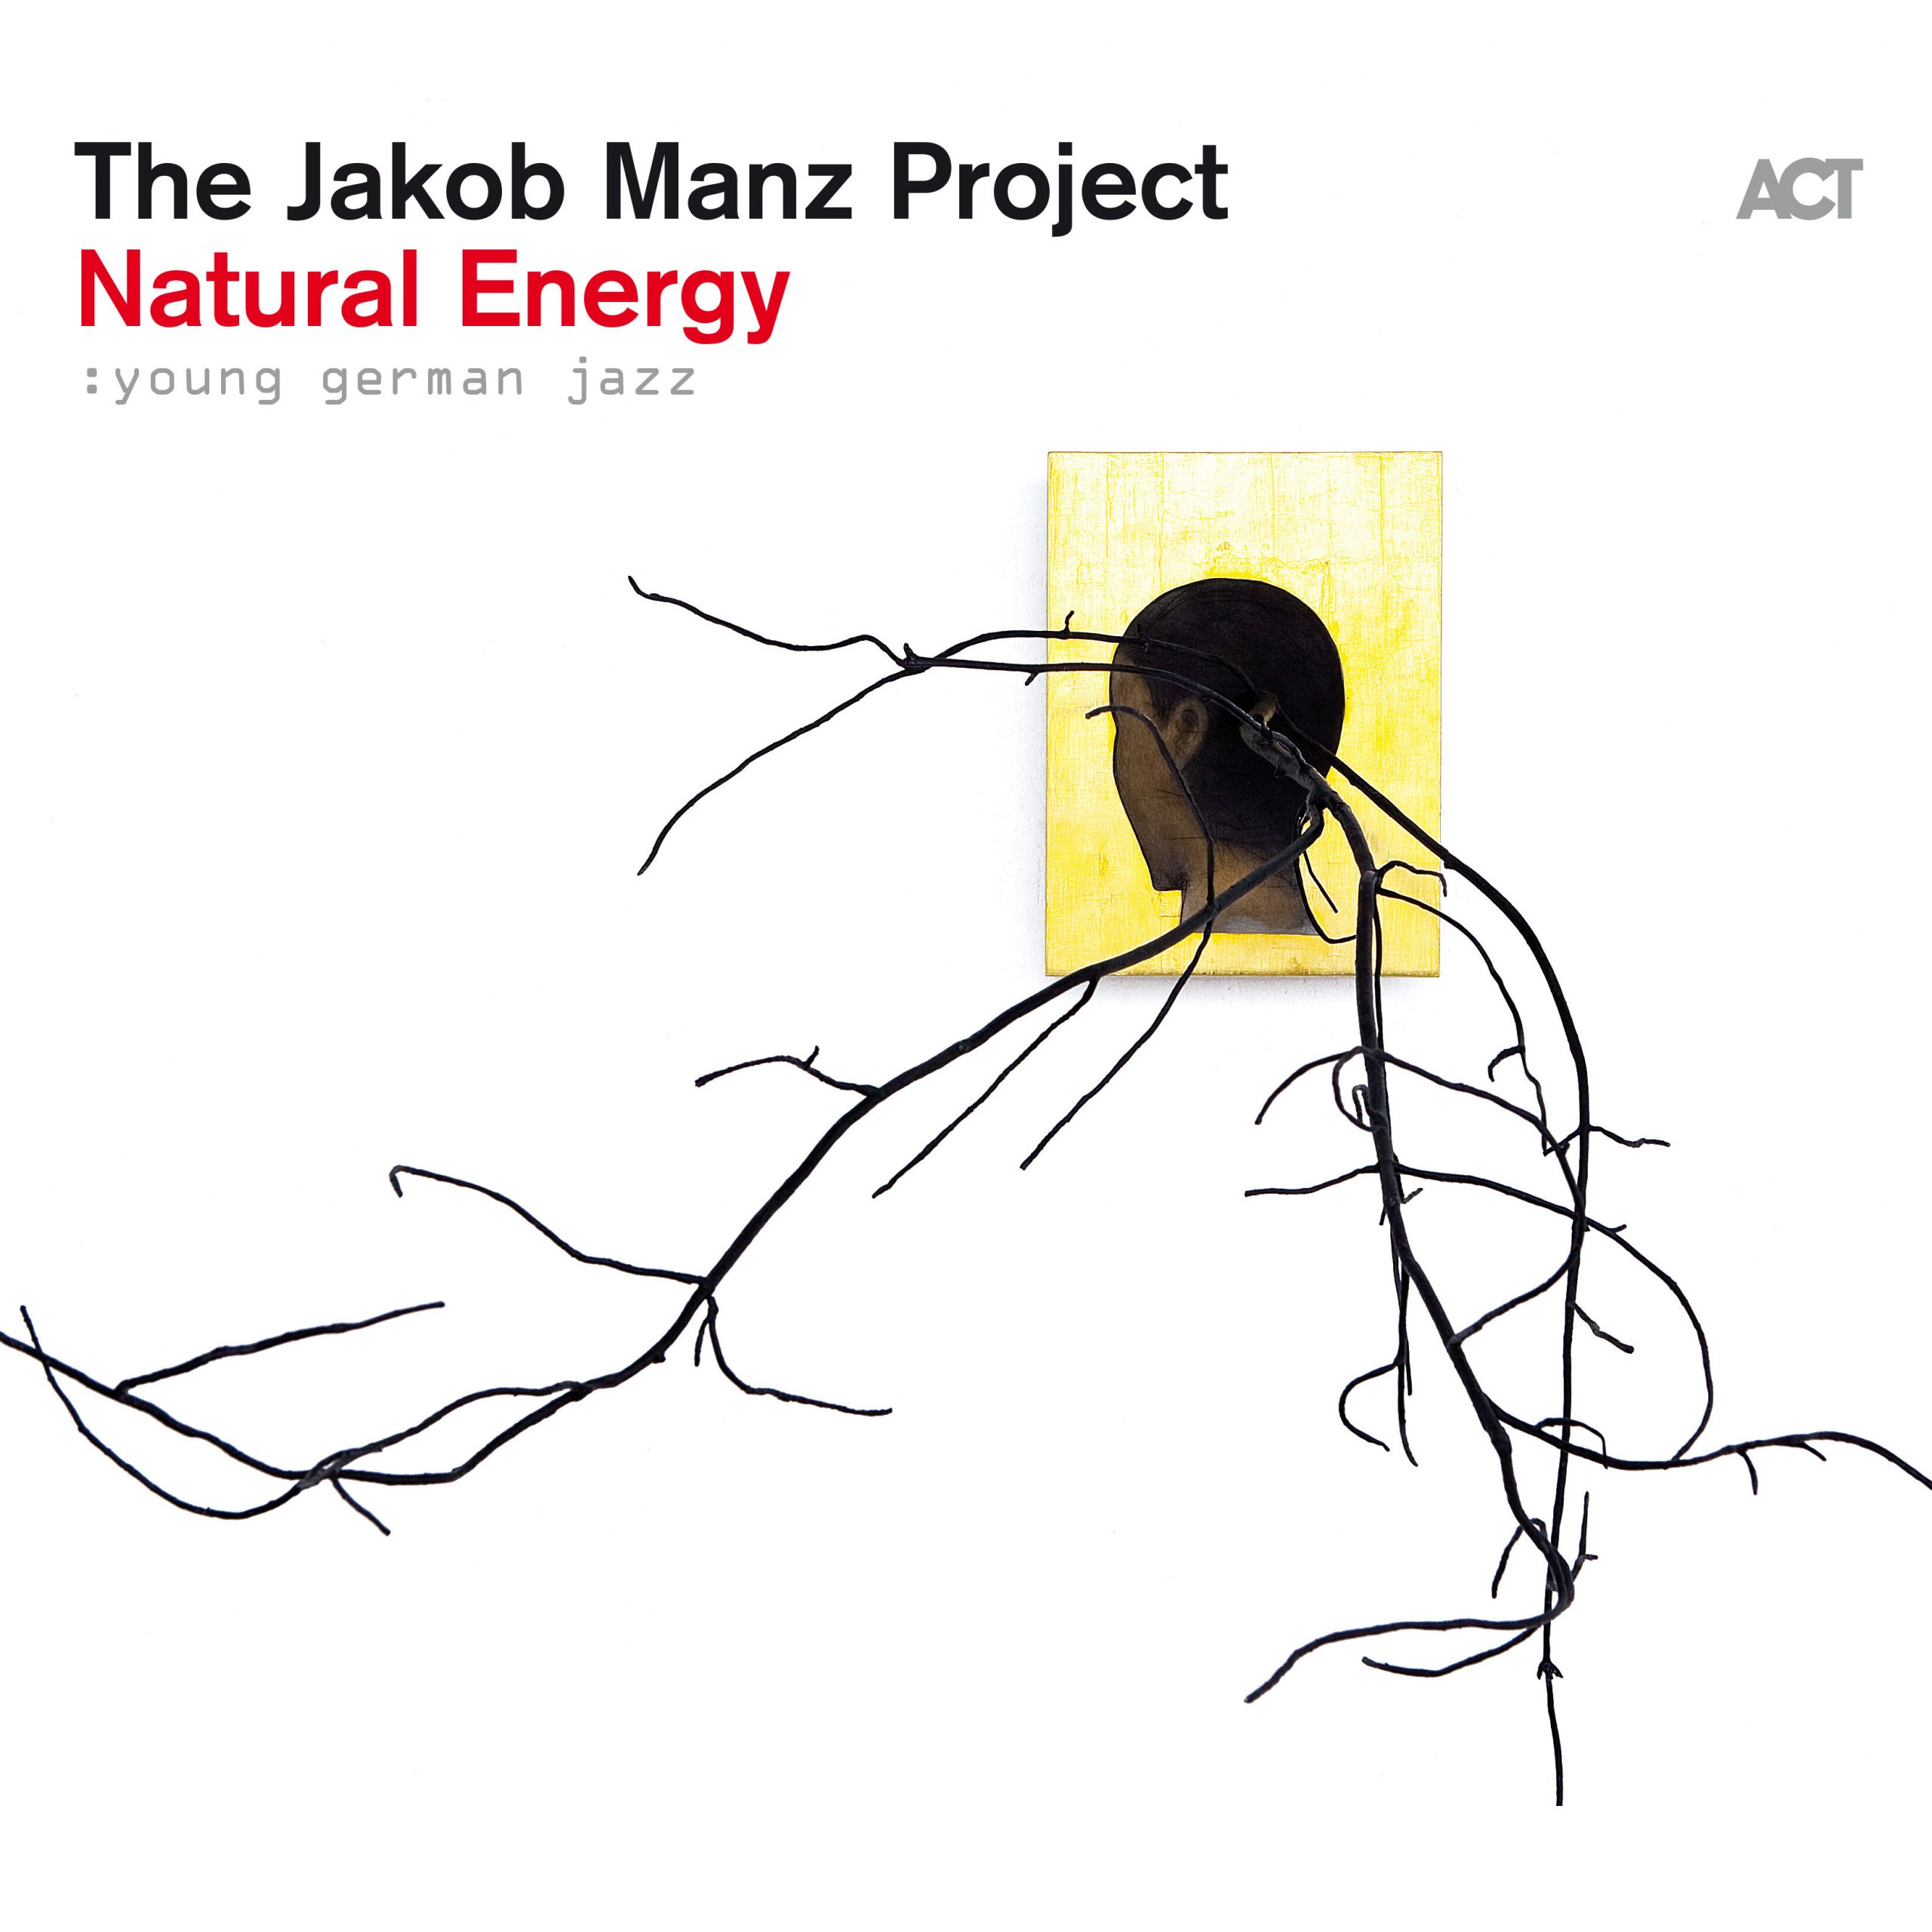 Album Cover: Natural Energy - The Jakob Manz Project